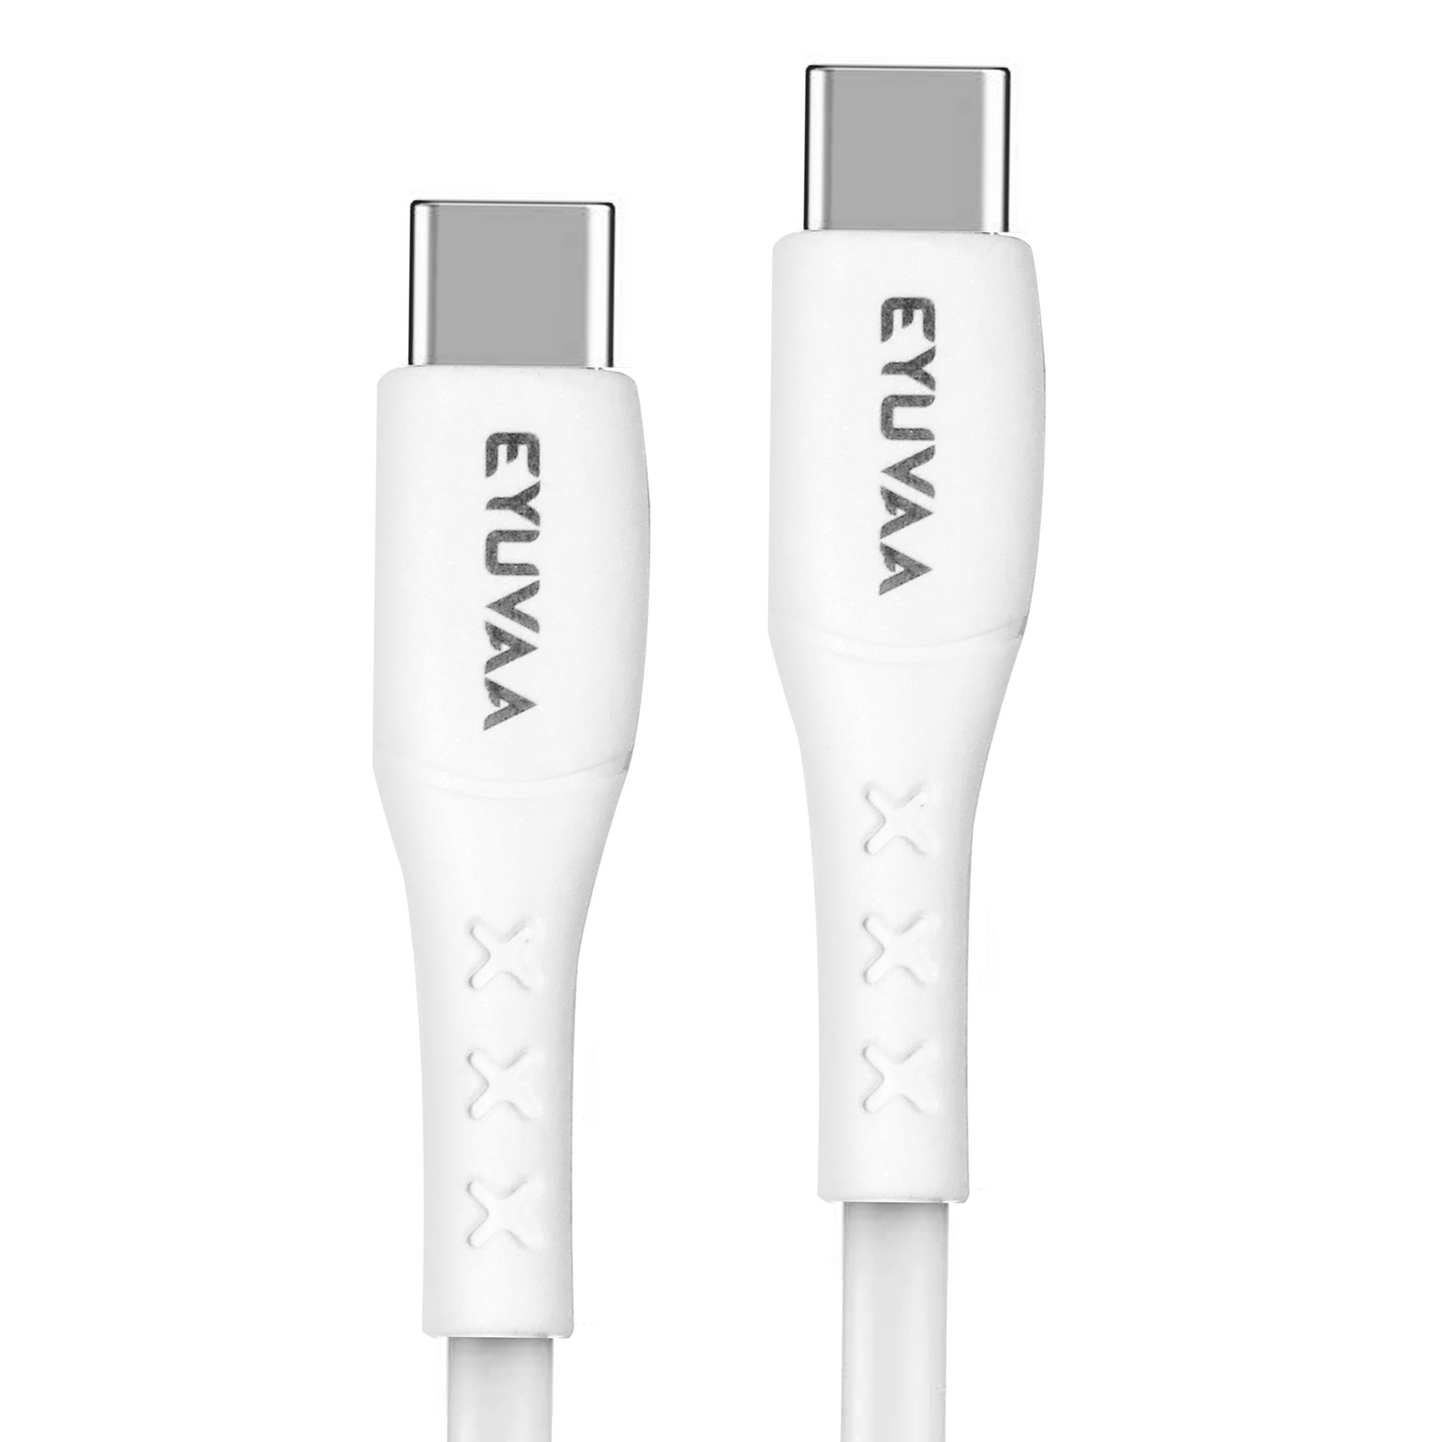 EYUVAA Type C to Type C Fast Charging Cable & Data Sync 480 Mbps | Unbreakable 60W,3A Rapid Turbo Charging Cable (3.3 Feet,1 Meter, White)